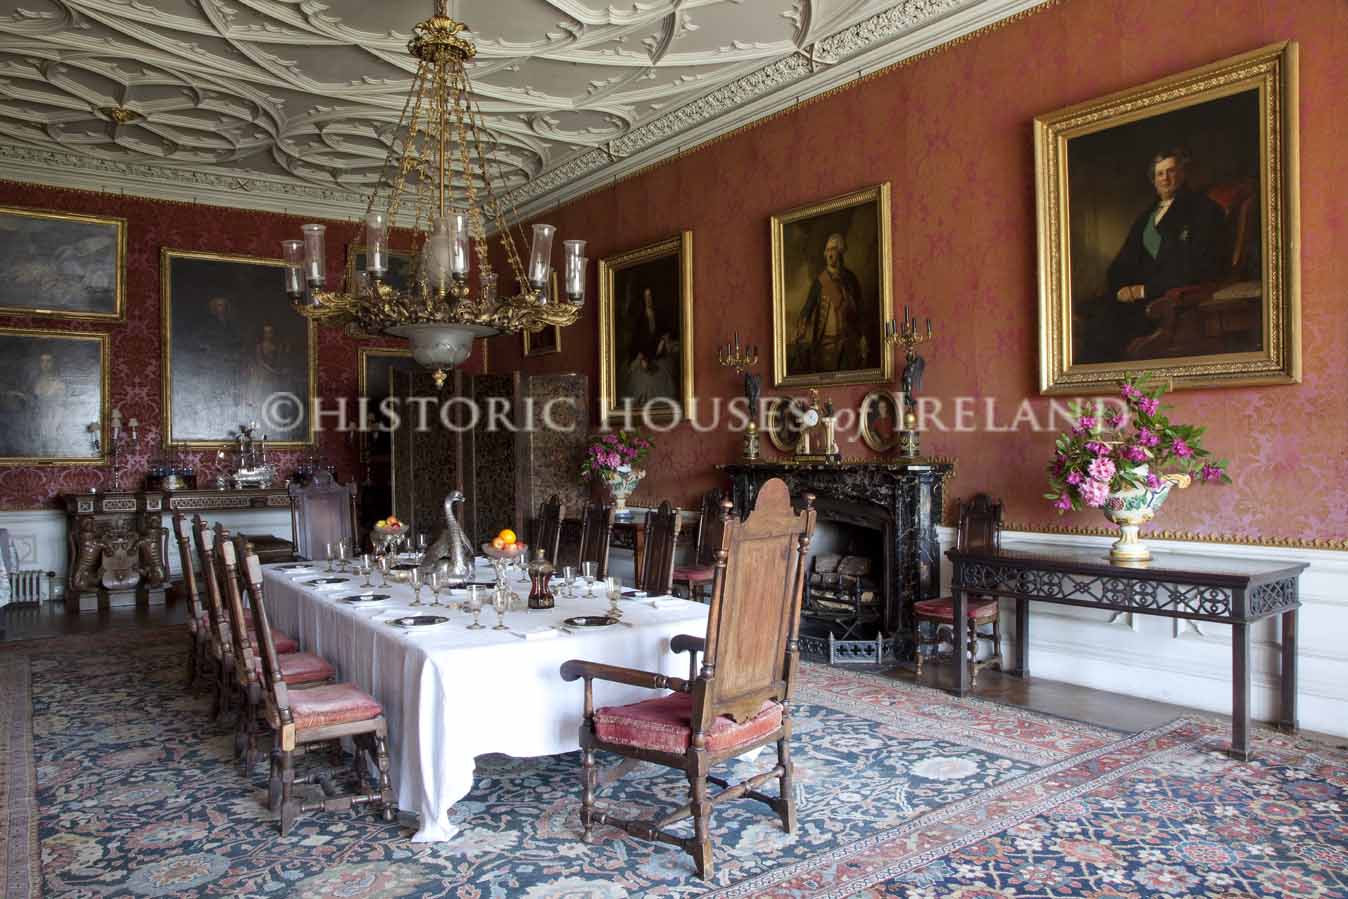 The great dining room at Birr Castle, overlooked by a portrait of the astronomer 3rd Earl. 